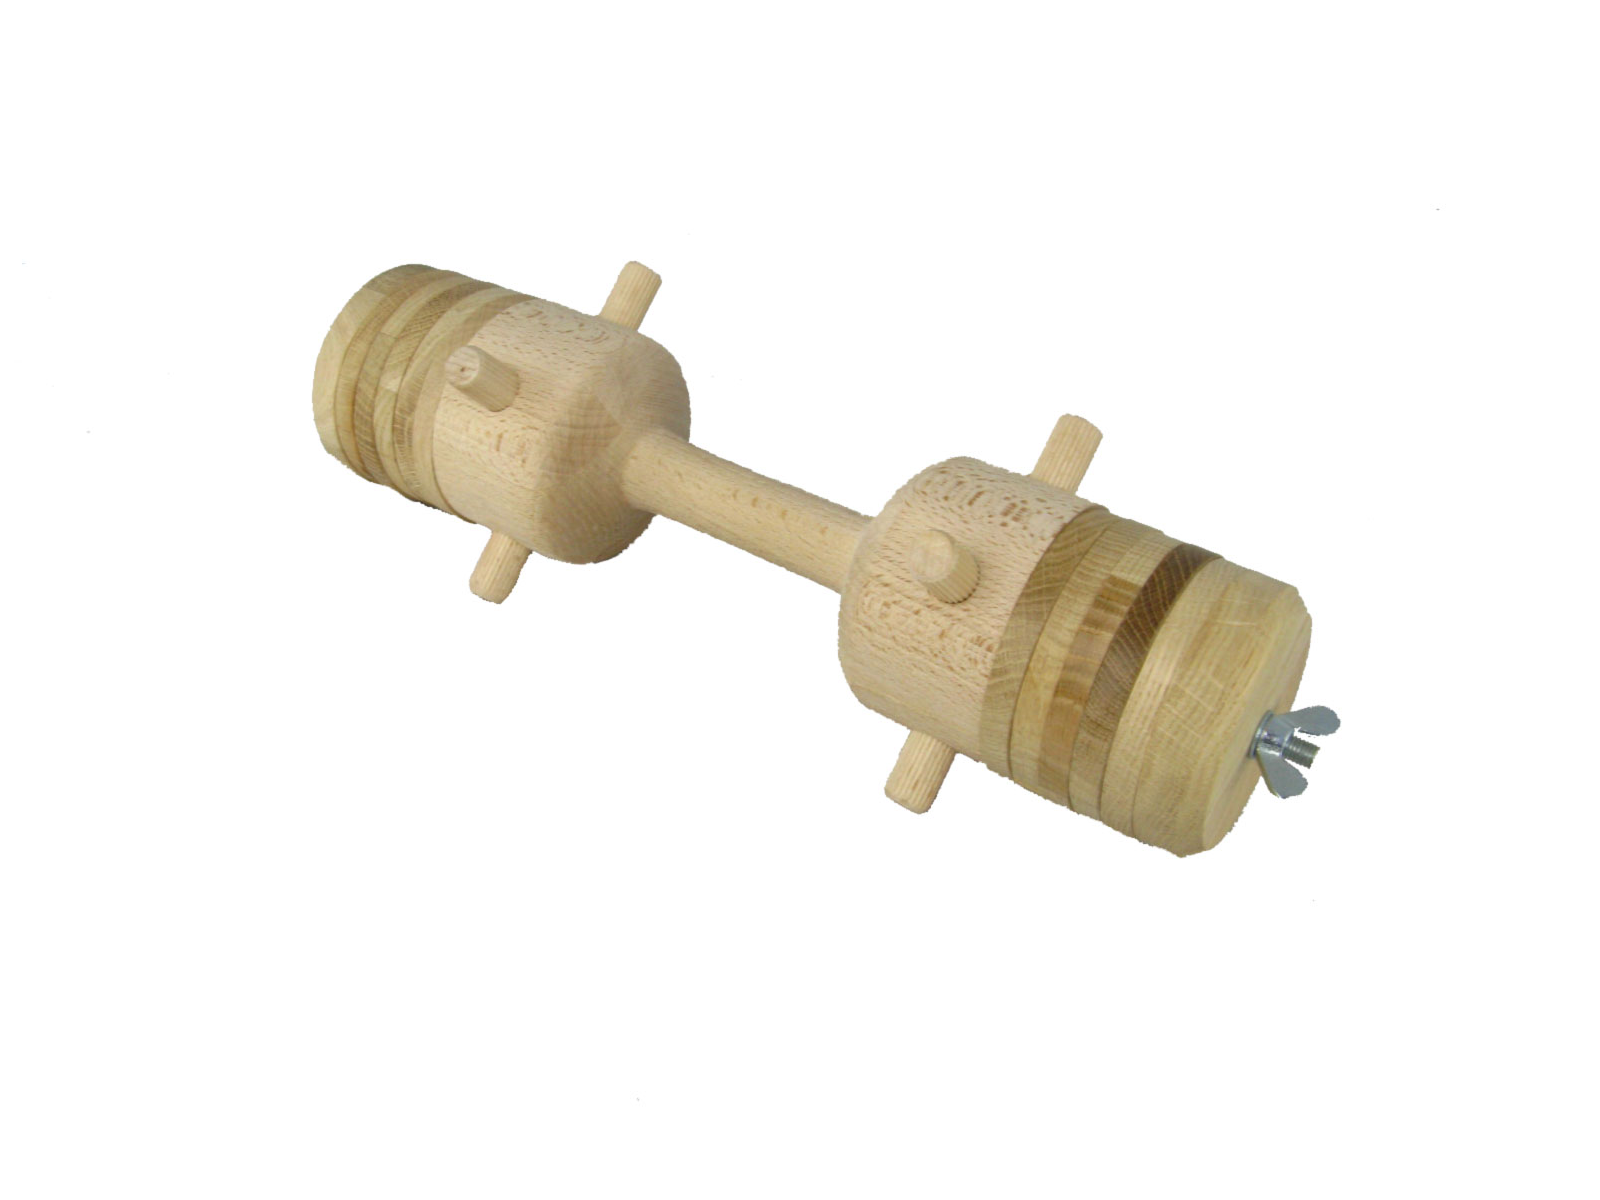 Dumbbell Wood (adjustable weight)